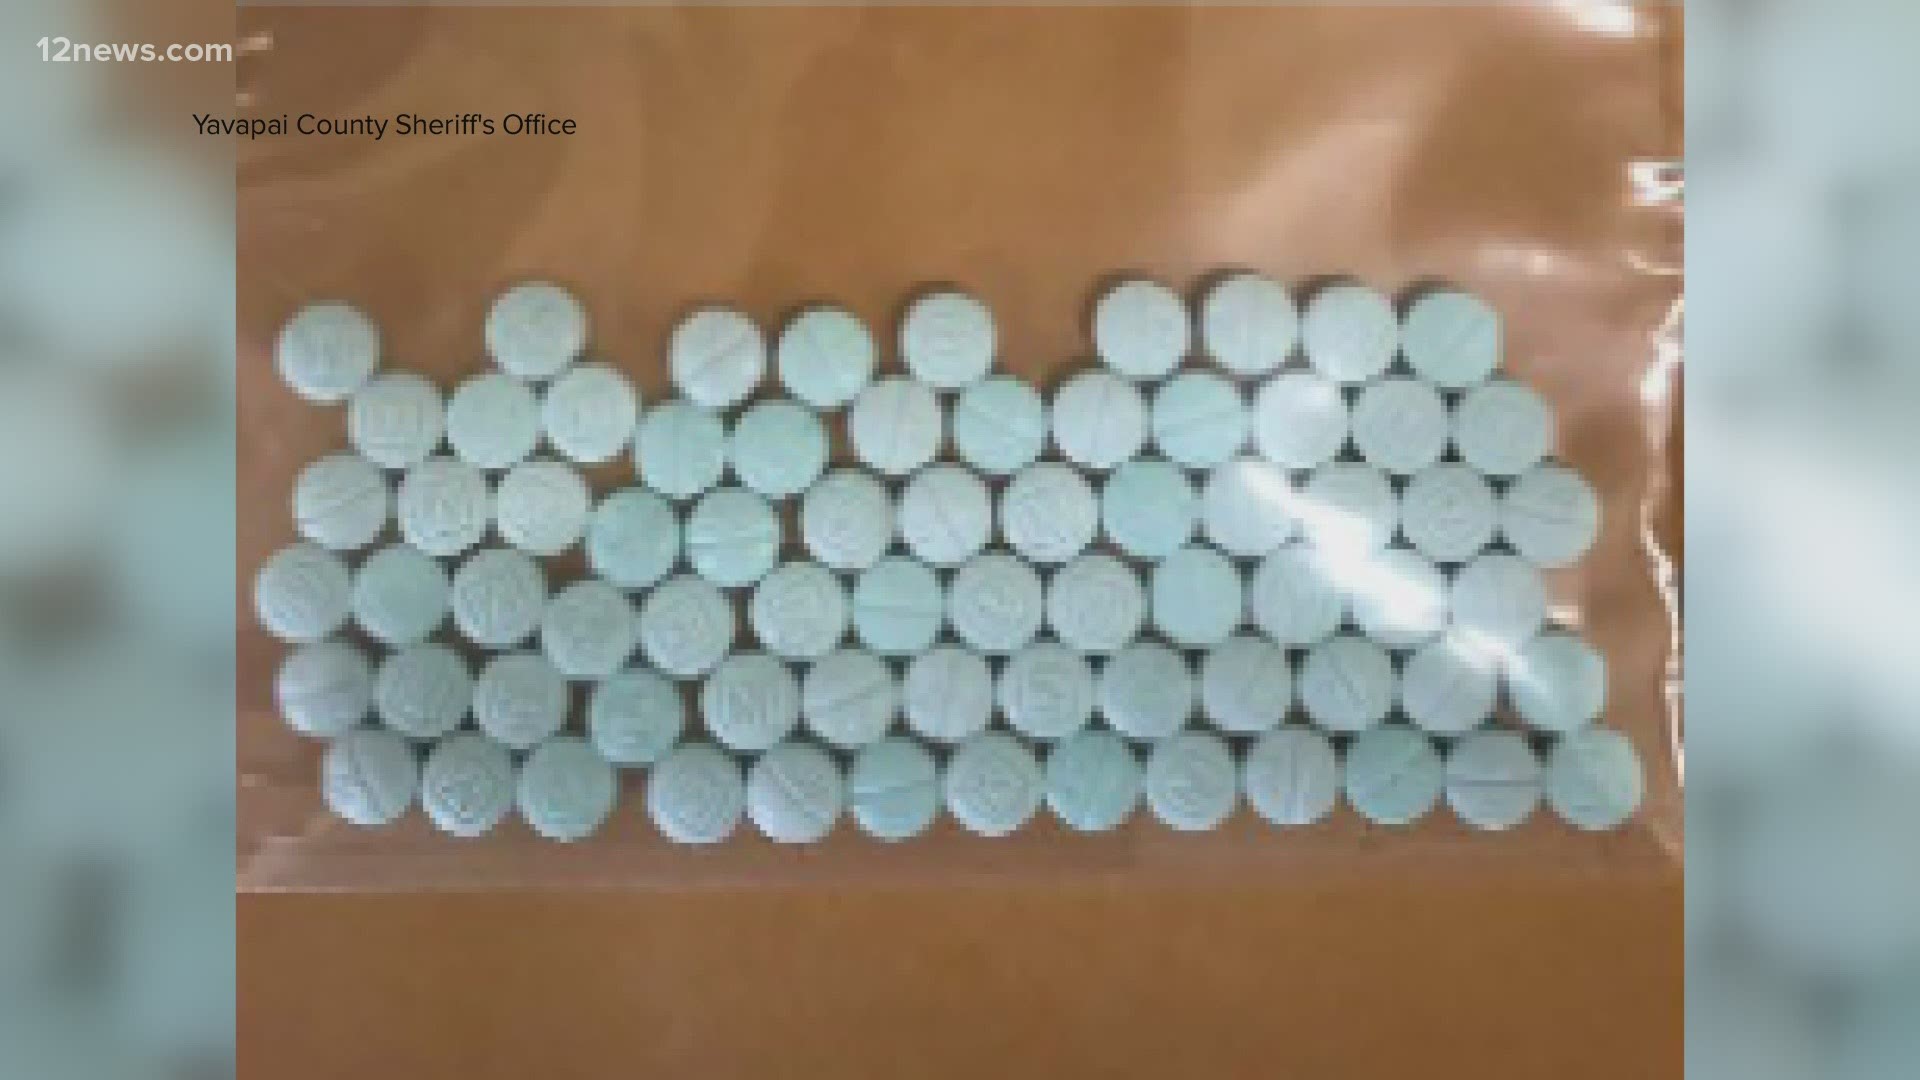 18,000 fentanyl pills are off the streets in Yavapai County this week. The sheriff's office there says deputies found the illicit drugs during traffic stops.